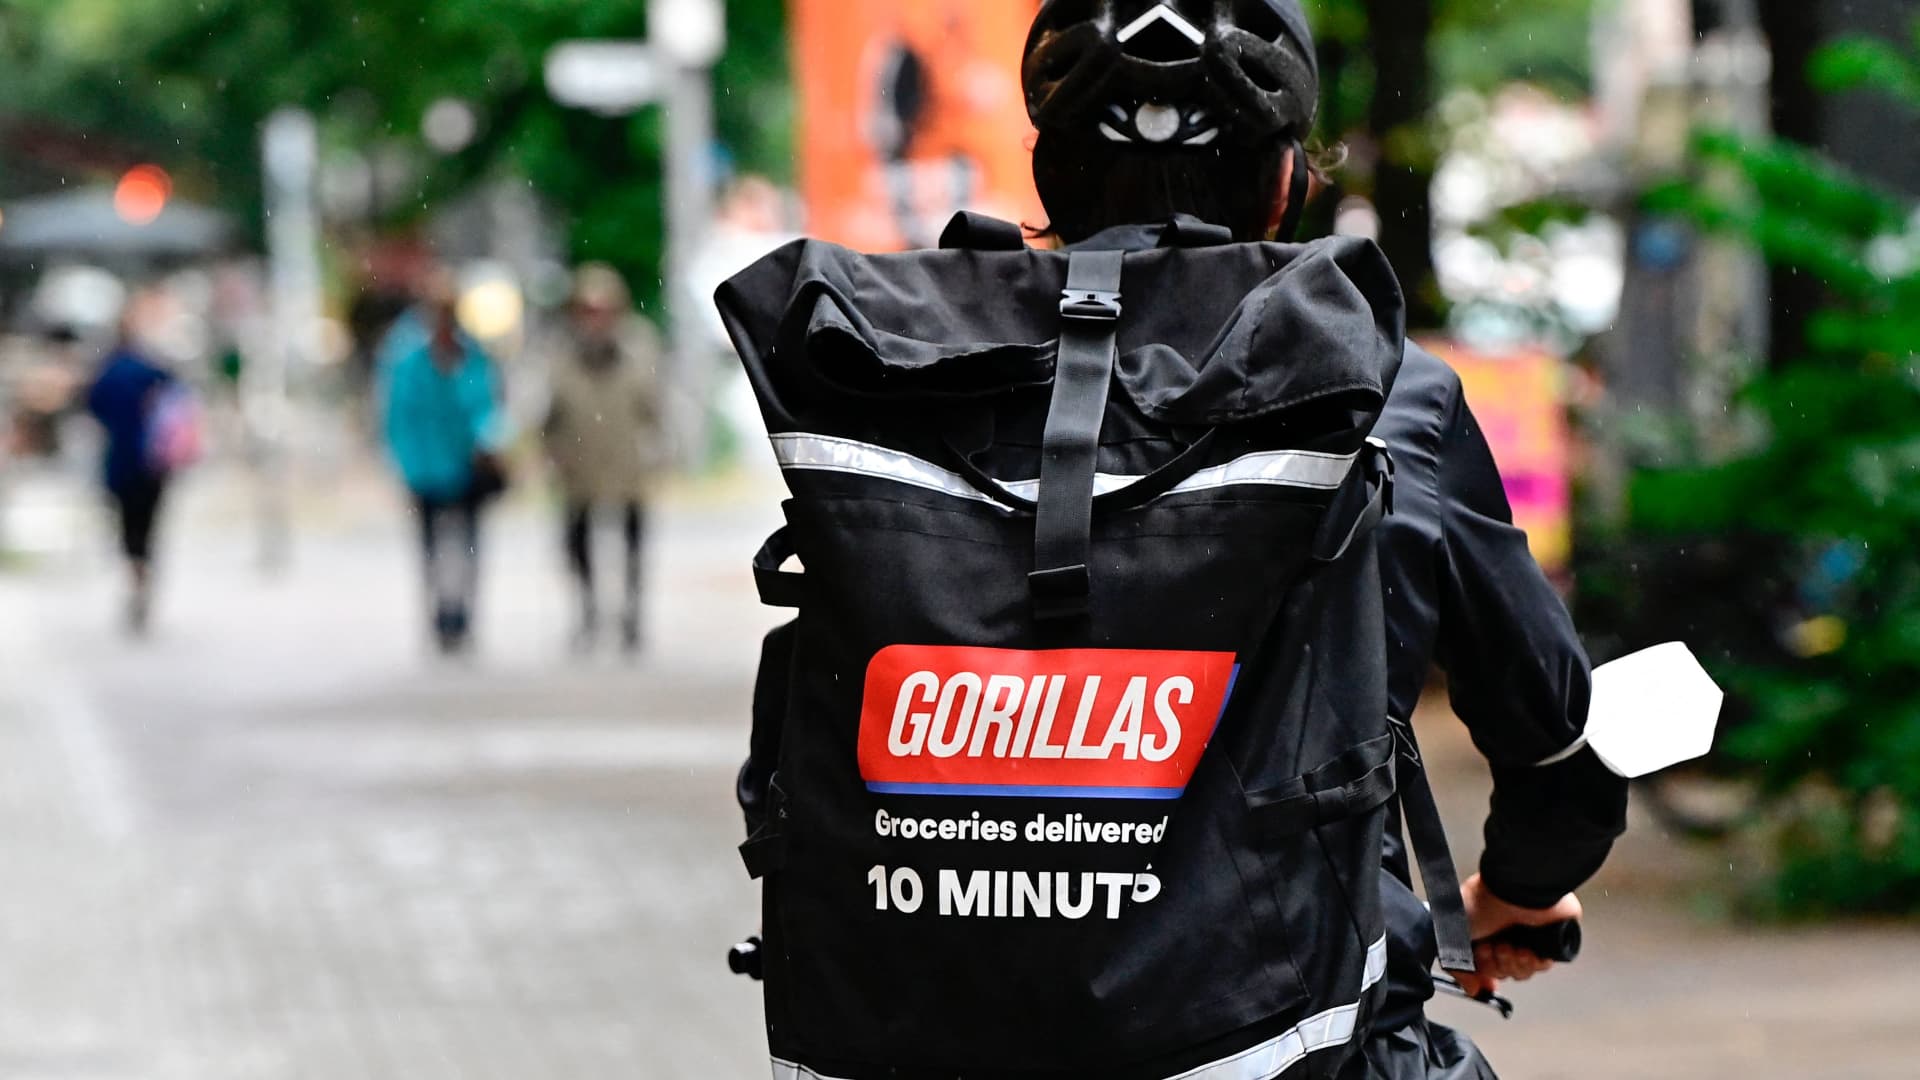 A courier for German grocery delivery start-up Gorillas, on his way to deliver an order in Berlin on July 8, 2021.